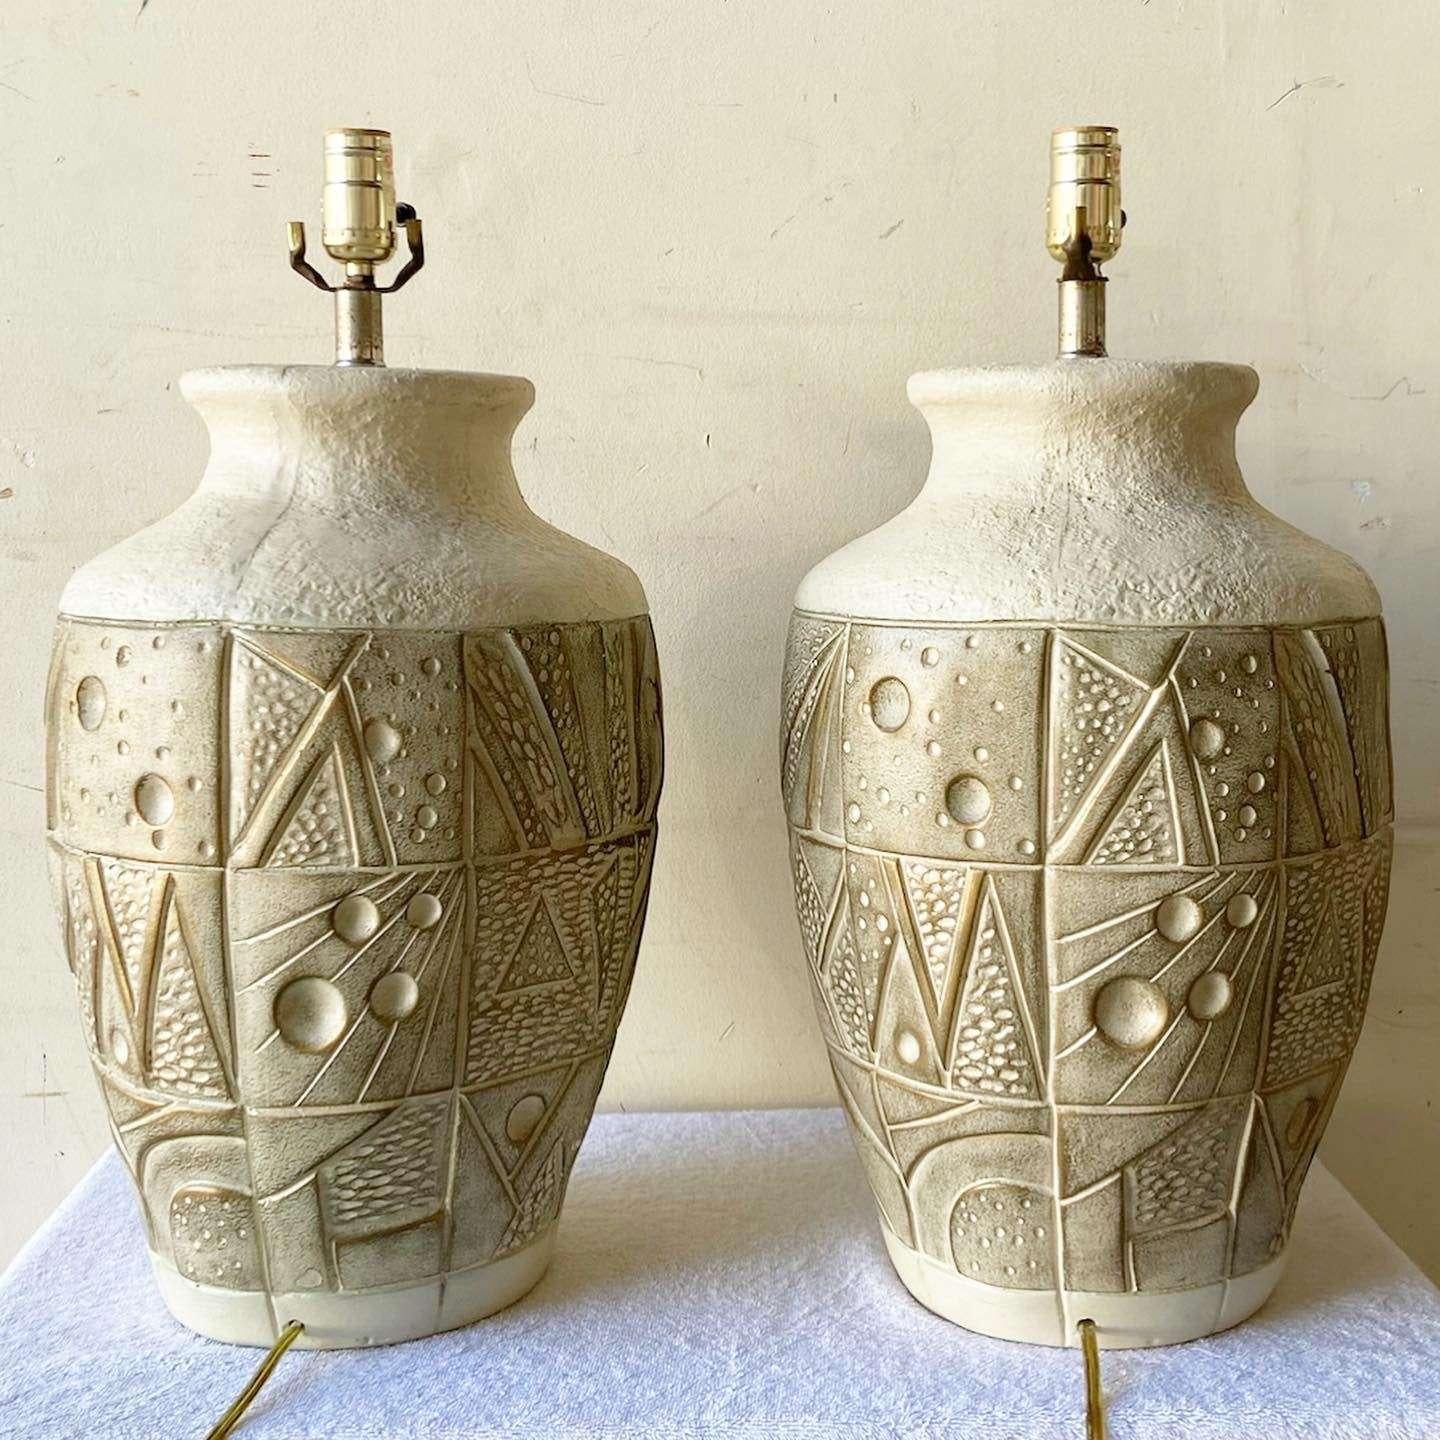 Late 20th Century Postmodern Cream and Tan Ceramic Table Lamps - Pair For Sale